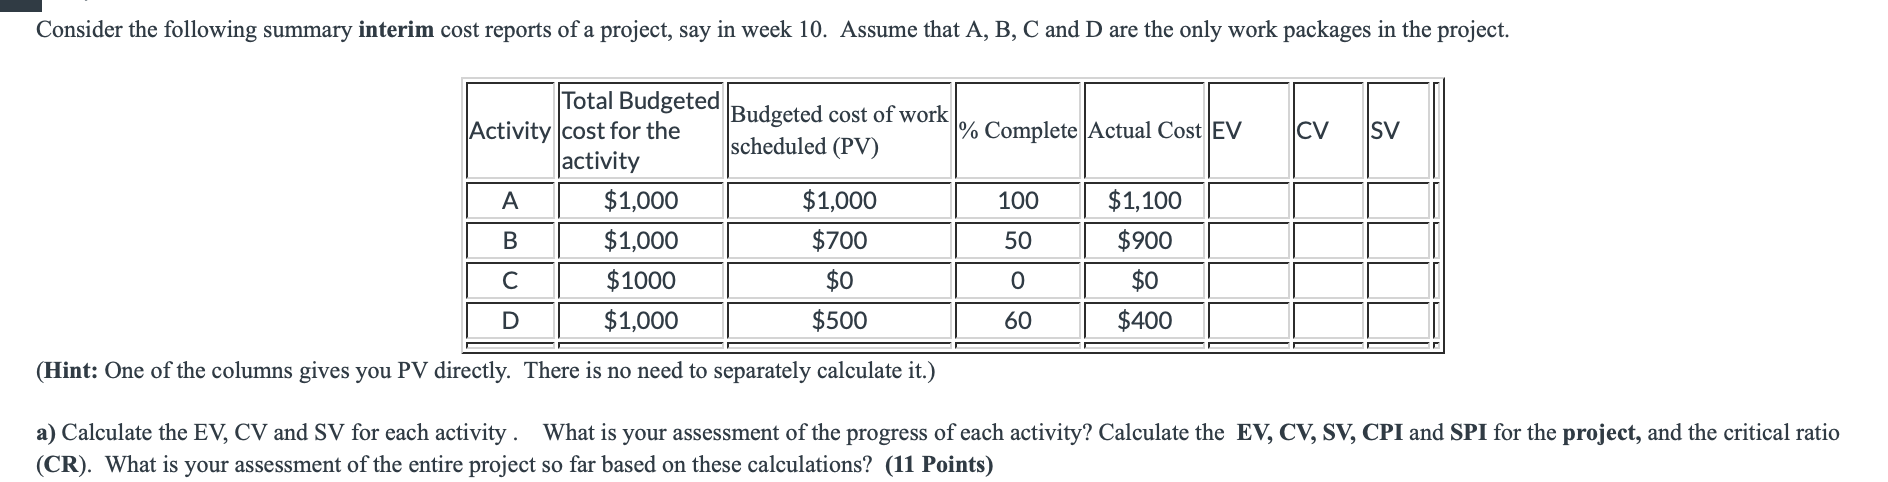 Consider the following summary interim cost reports of a project, say in week 10. Assume that A, B, C and D